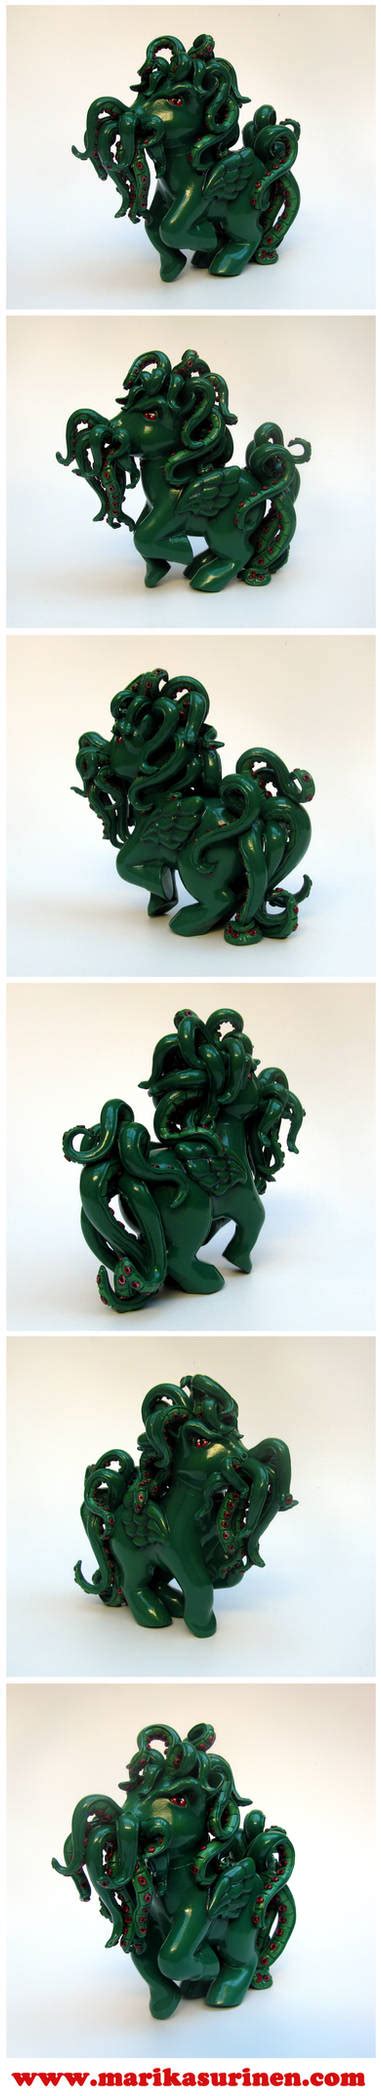 My Little Cthulhu 2nd By Spippo On Deviantart